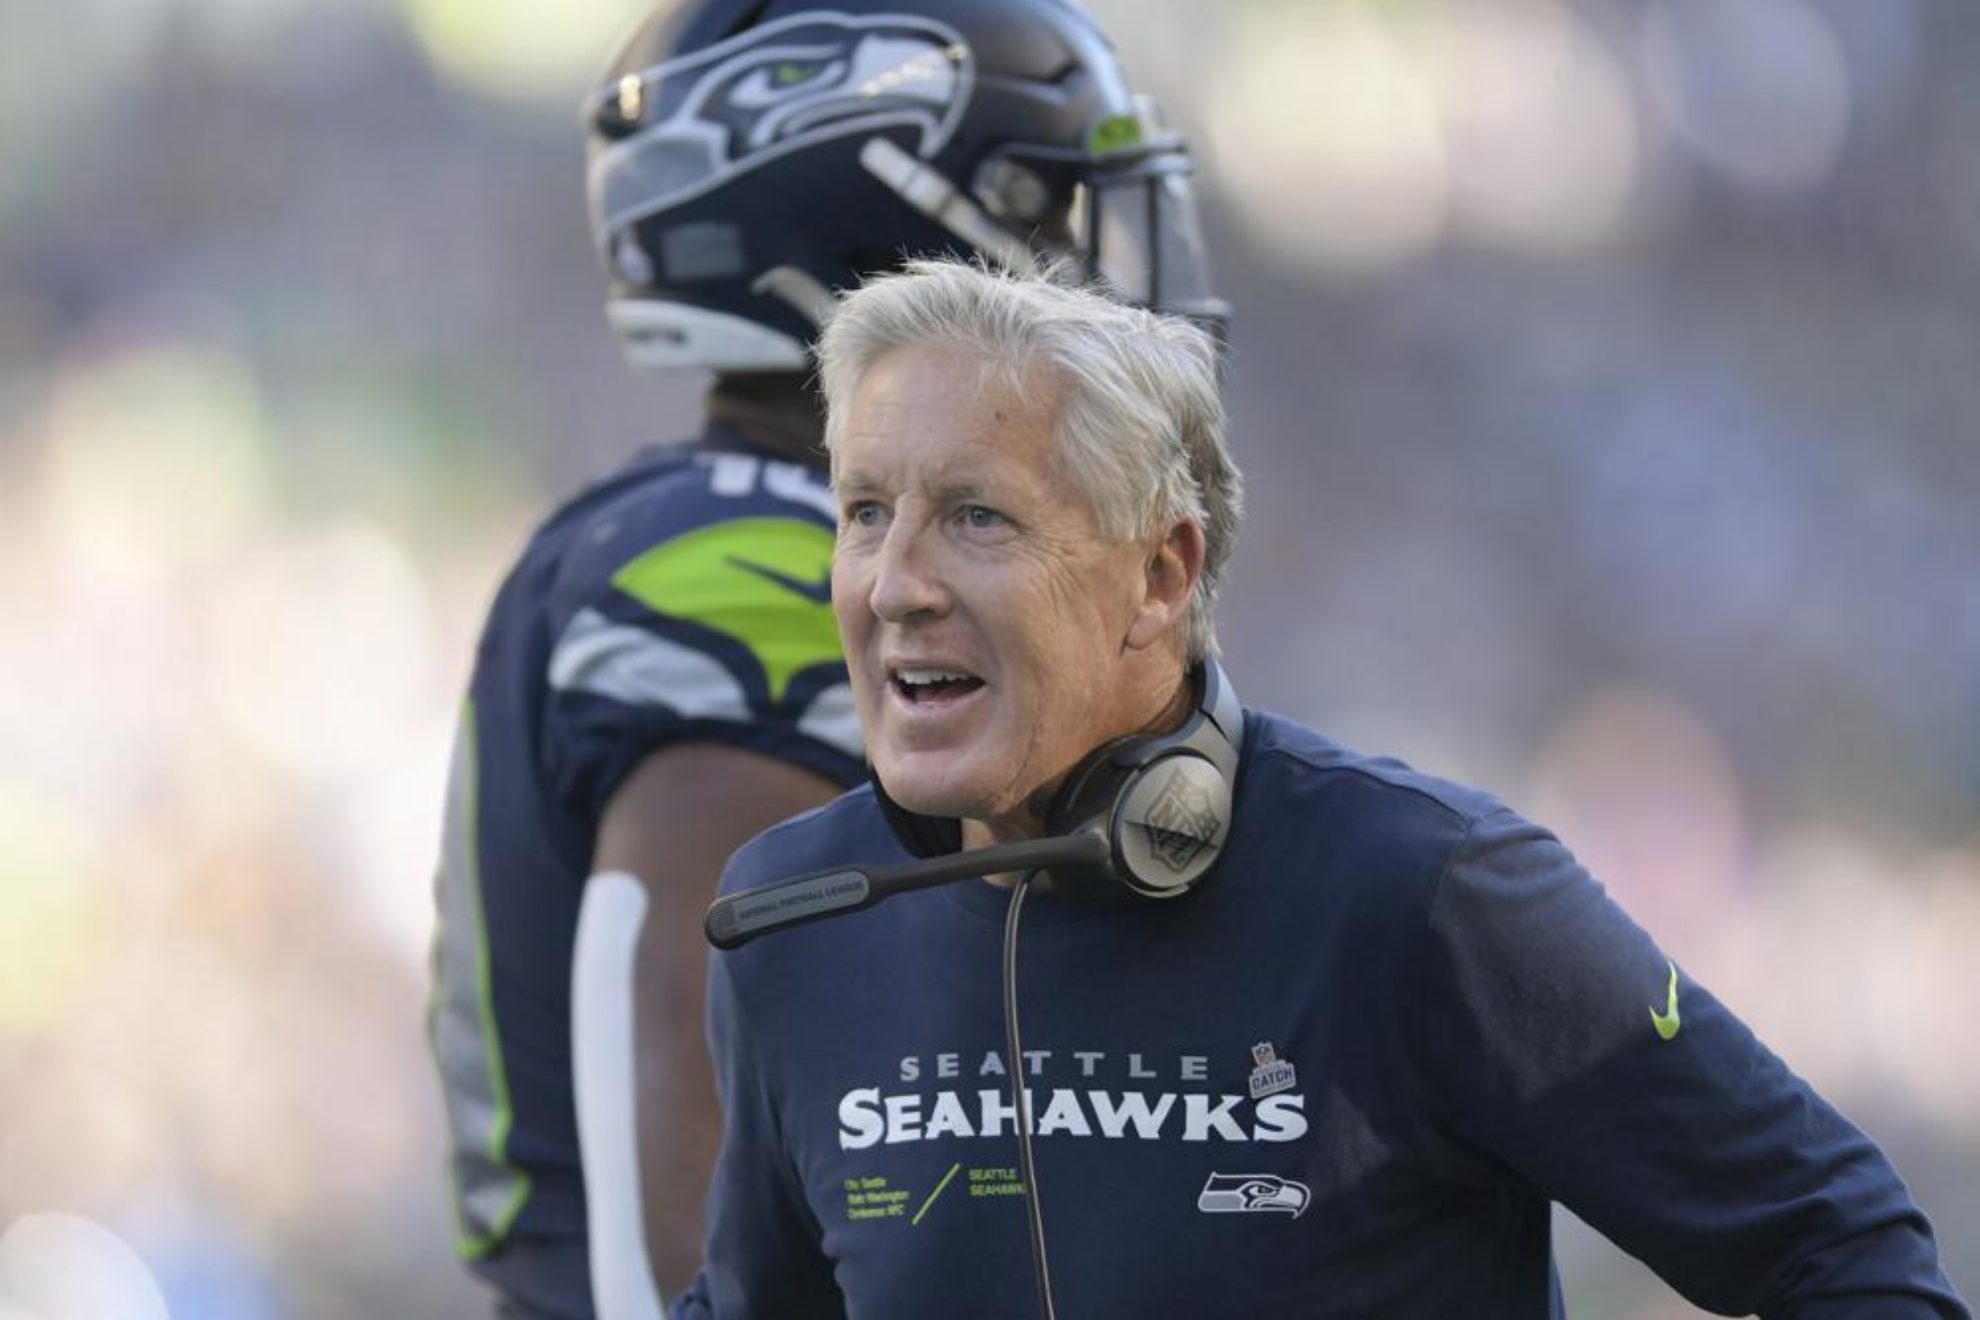 Seattle Seahawks head coach Pete Carroll greets players during an NFL game.